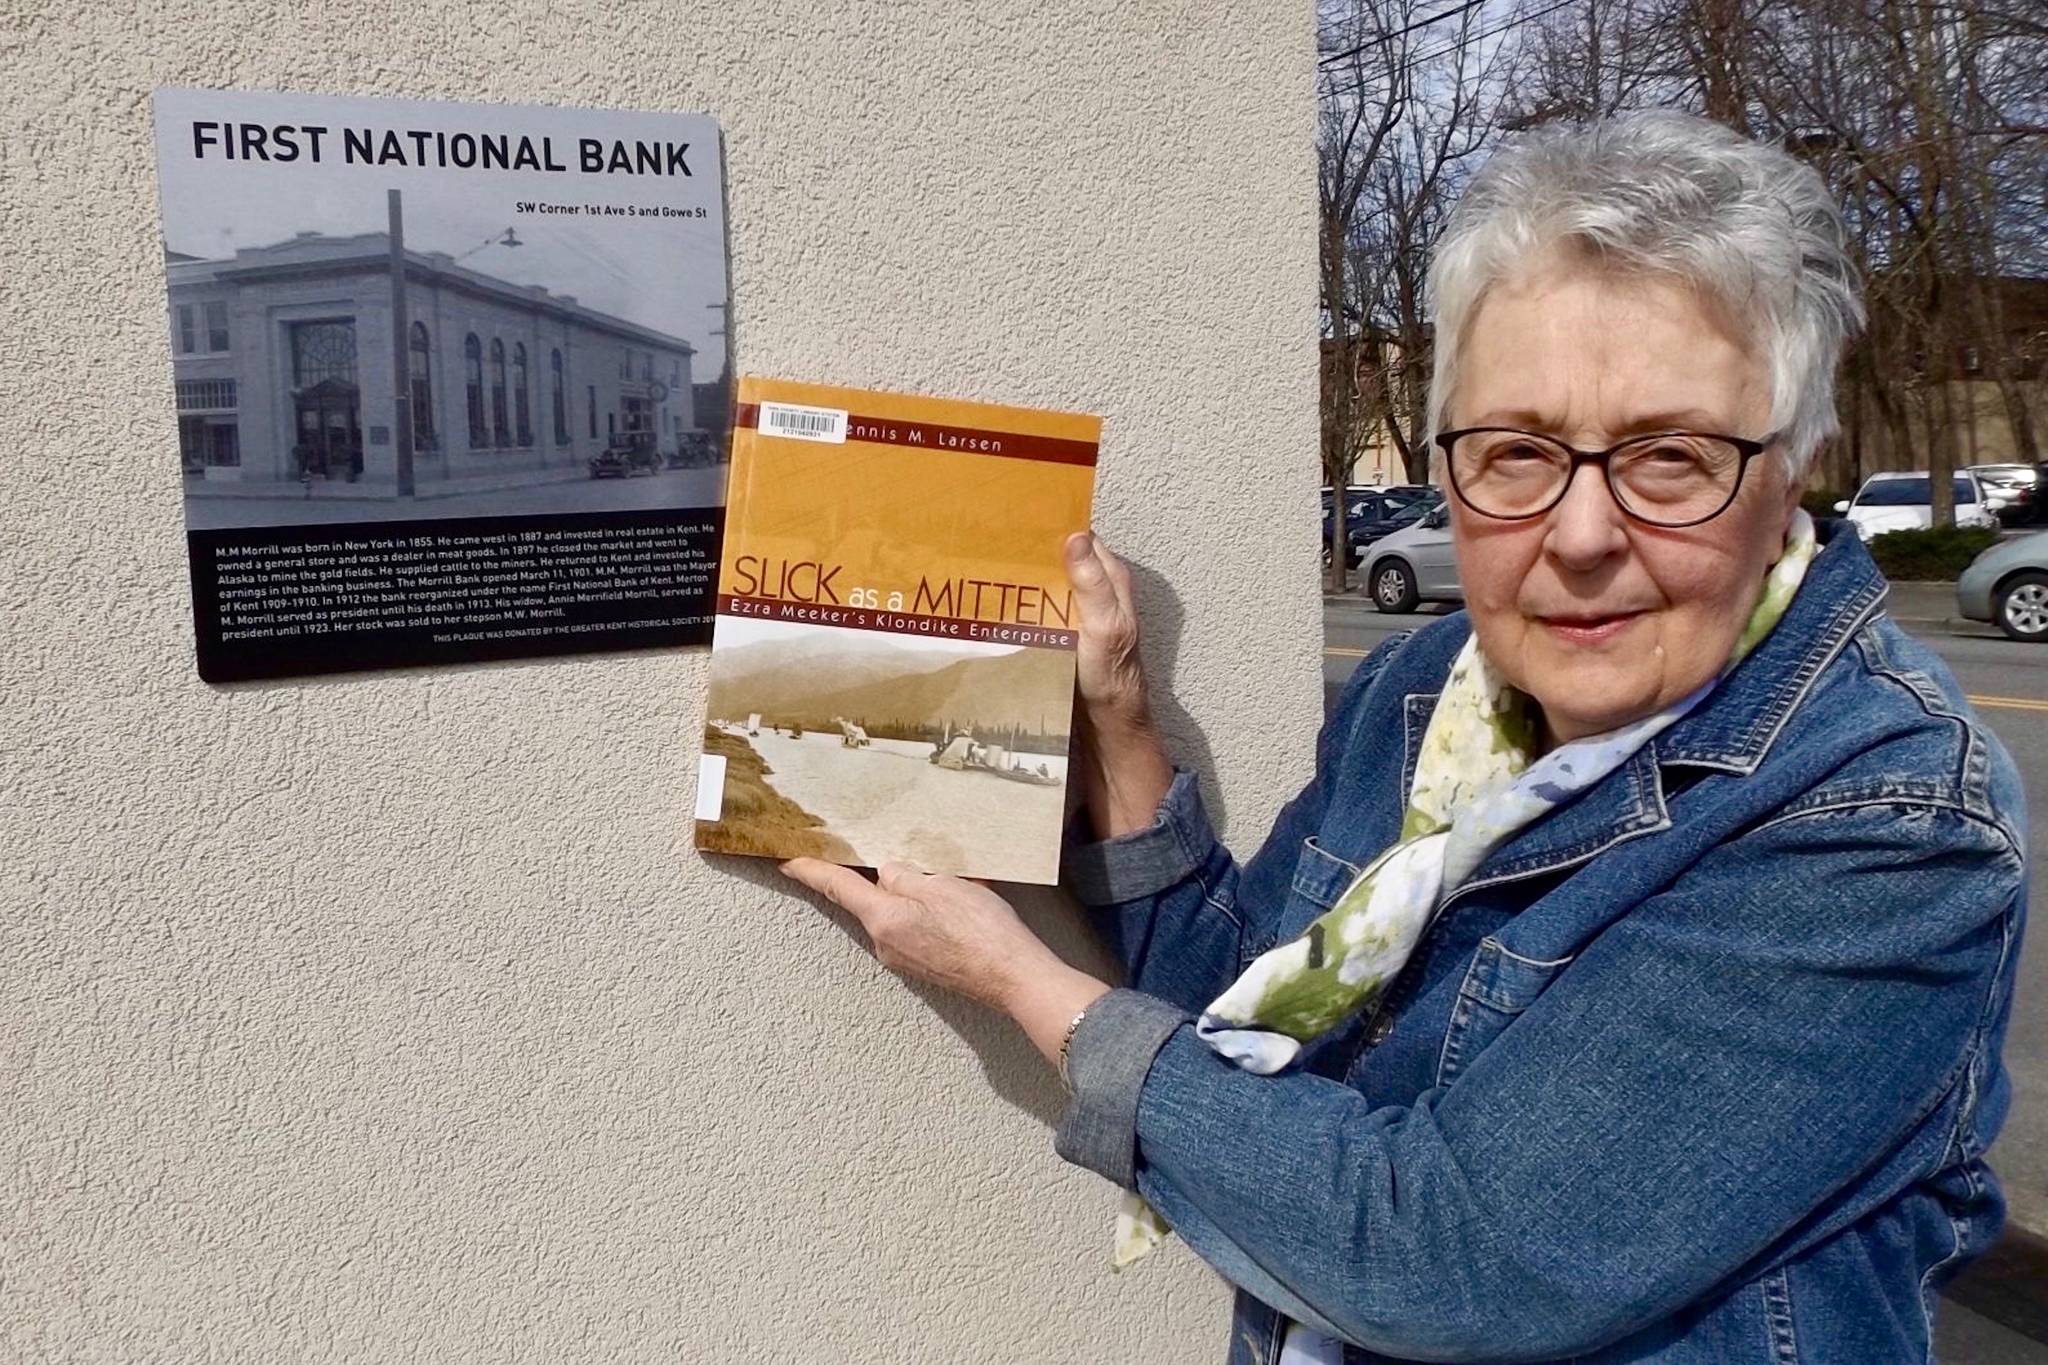 The Kent Historical Museum’s Nancy Simpson displays “Slick as a Mitten,” the book that will be discussed in the April 13 Bookmarks Landmarks program in Kent. COURTESY PHOTO, SoCoCulture